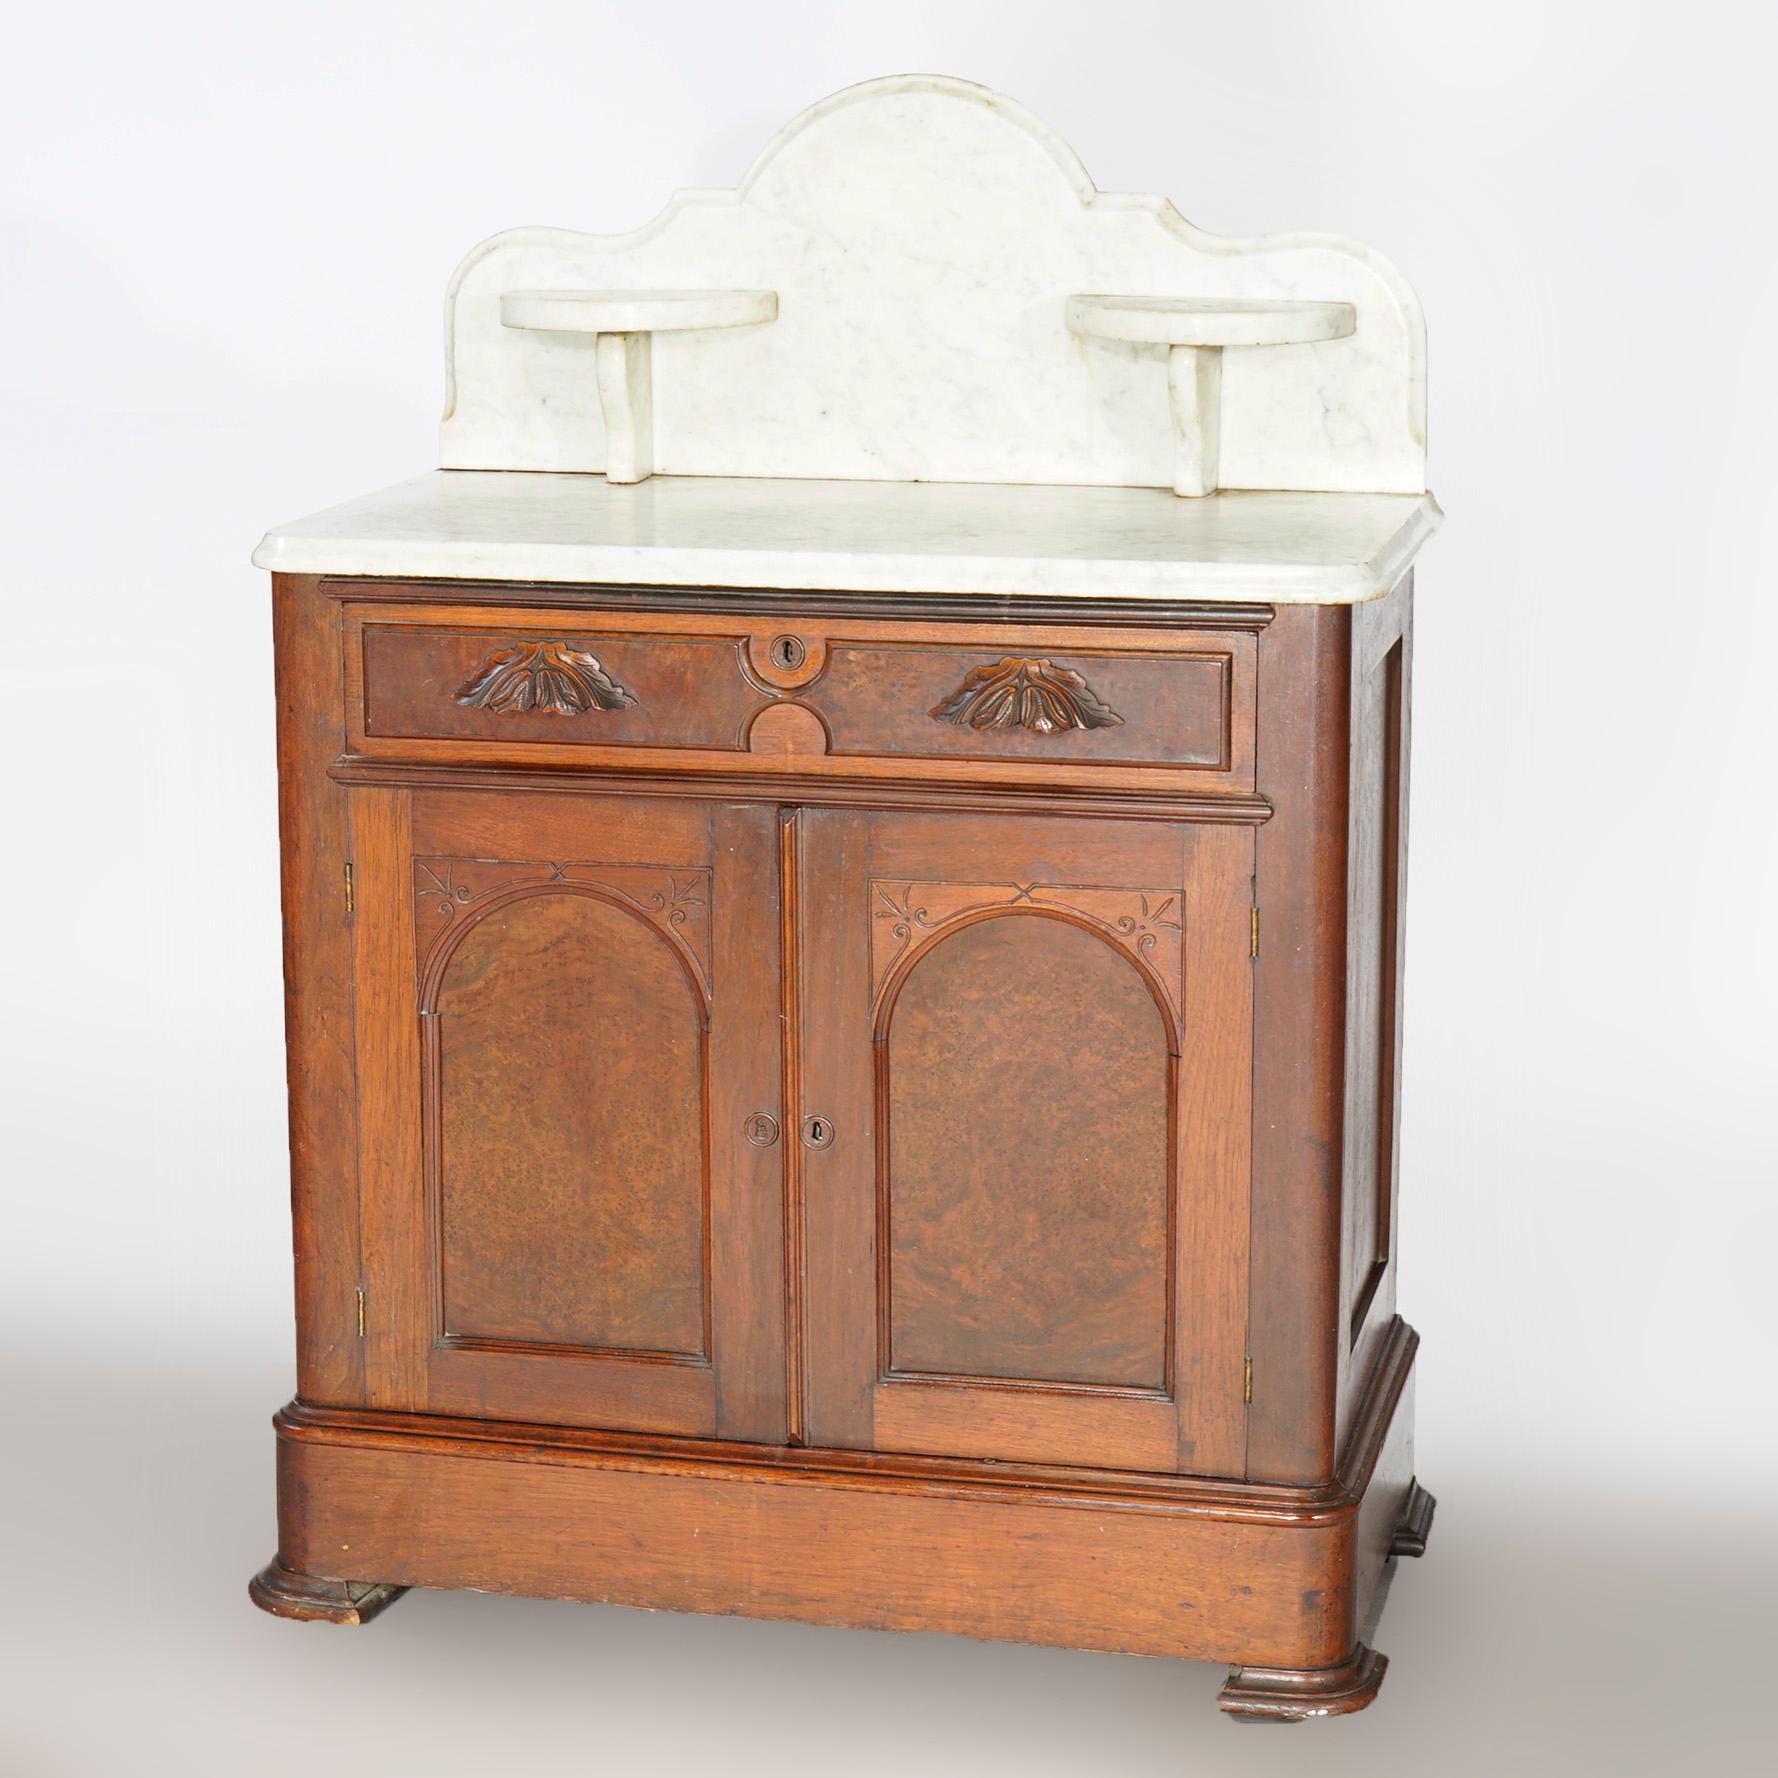 An antique wash stand offers shaped marble top with shaped backsplash having candle stands over walnut and burl base with frieze drawer over cabinet with double doors having arched panels, c1890

Measures- 43.25'' H x 32'' W x 17'' D.